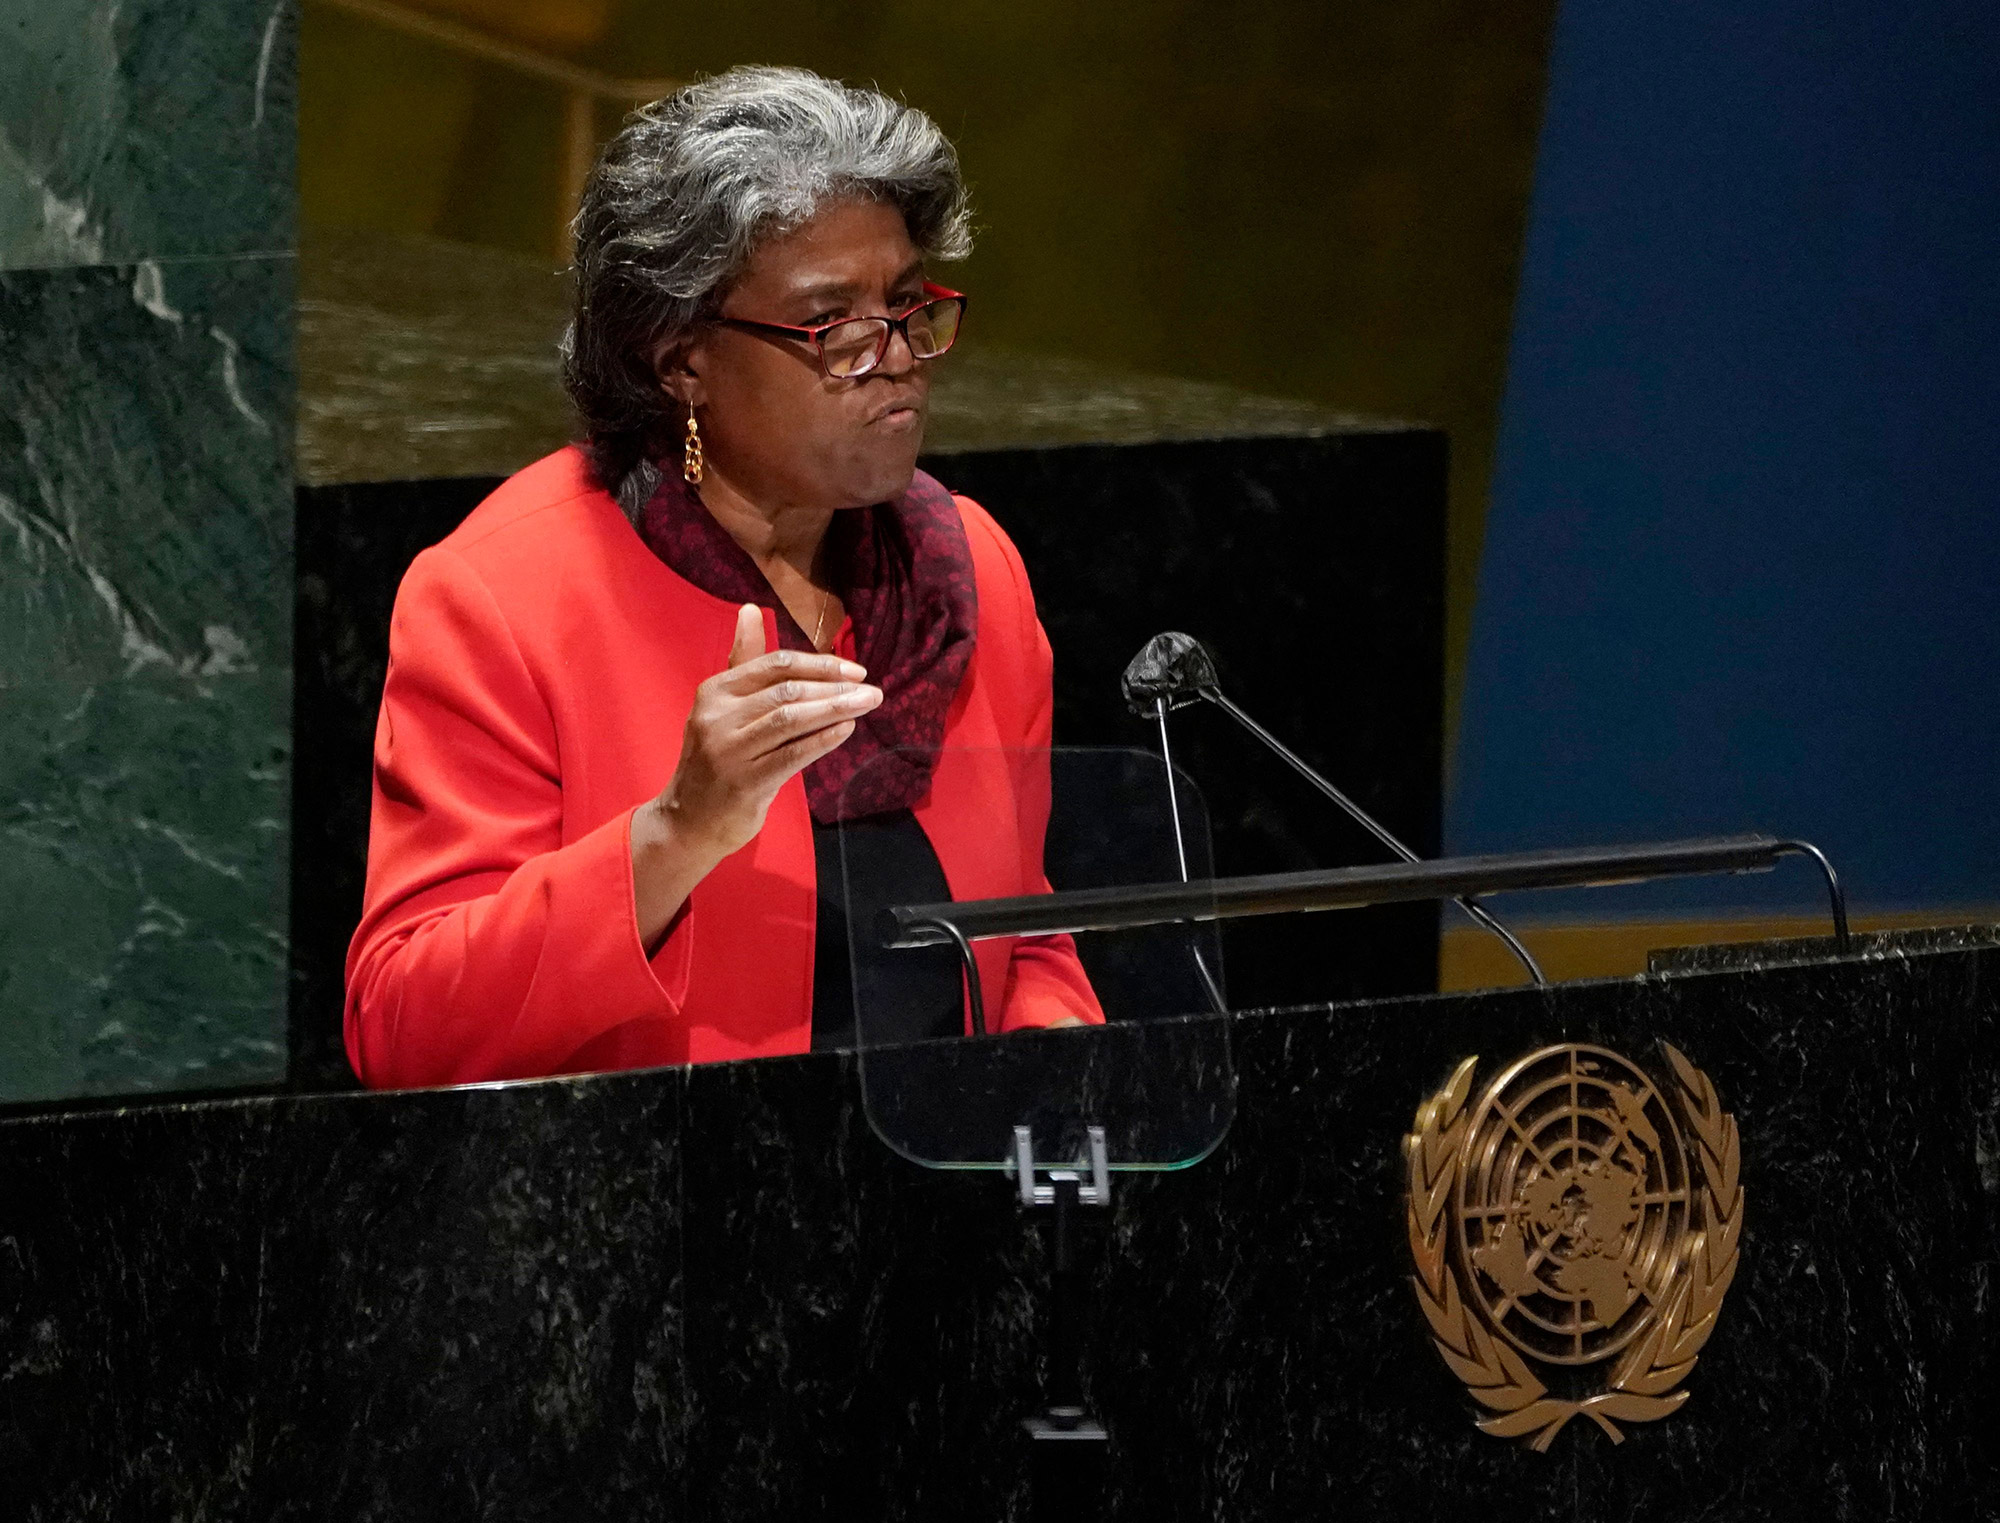 US Ambassador Linda Thomas-Greenfield speaks at the UN General Assembly meeting in New York on Wednesday.